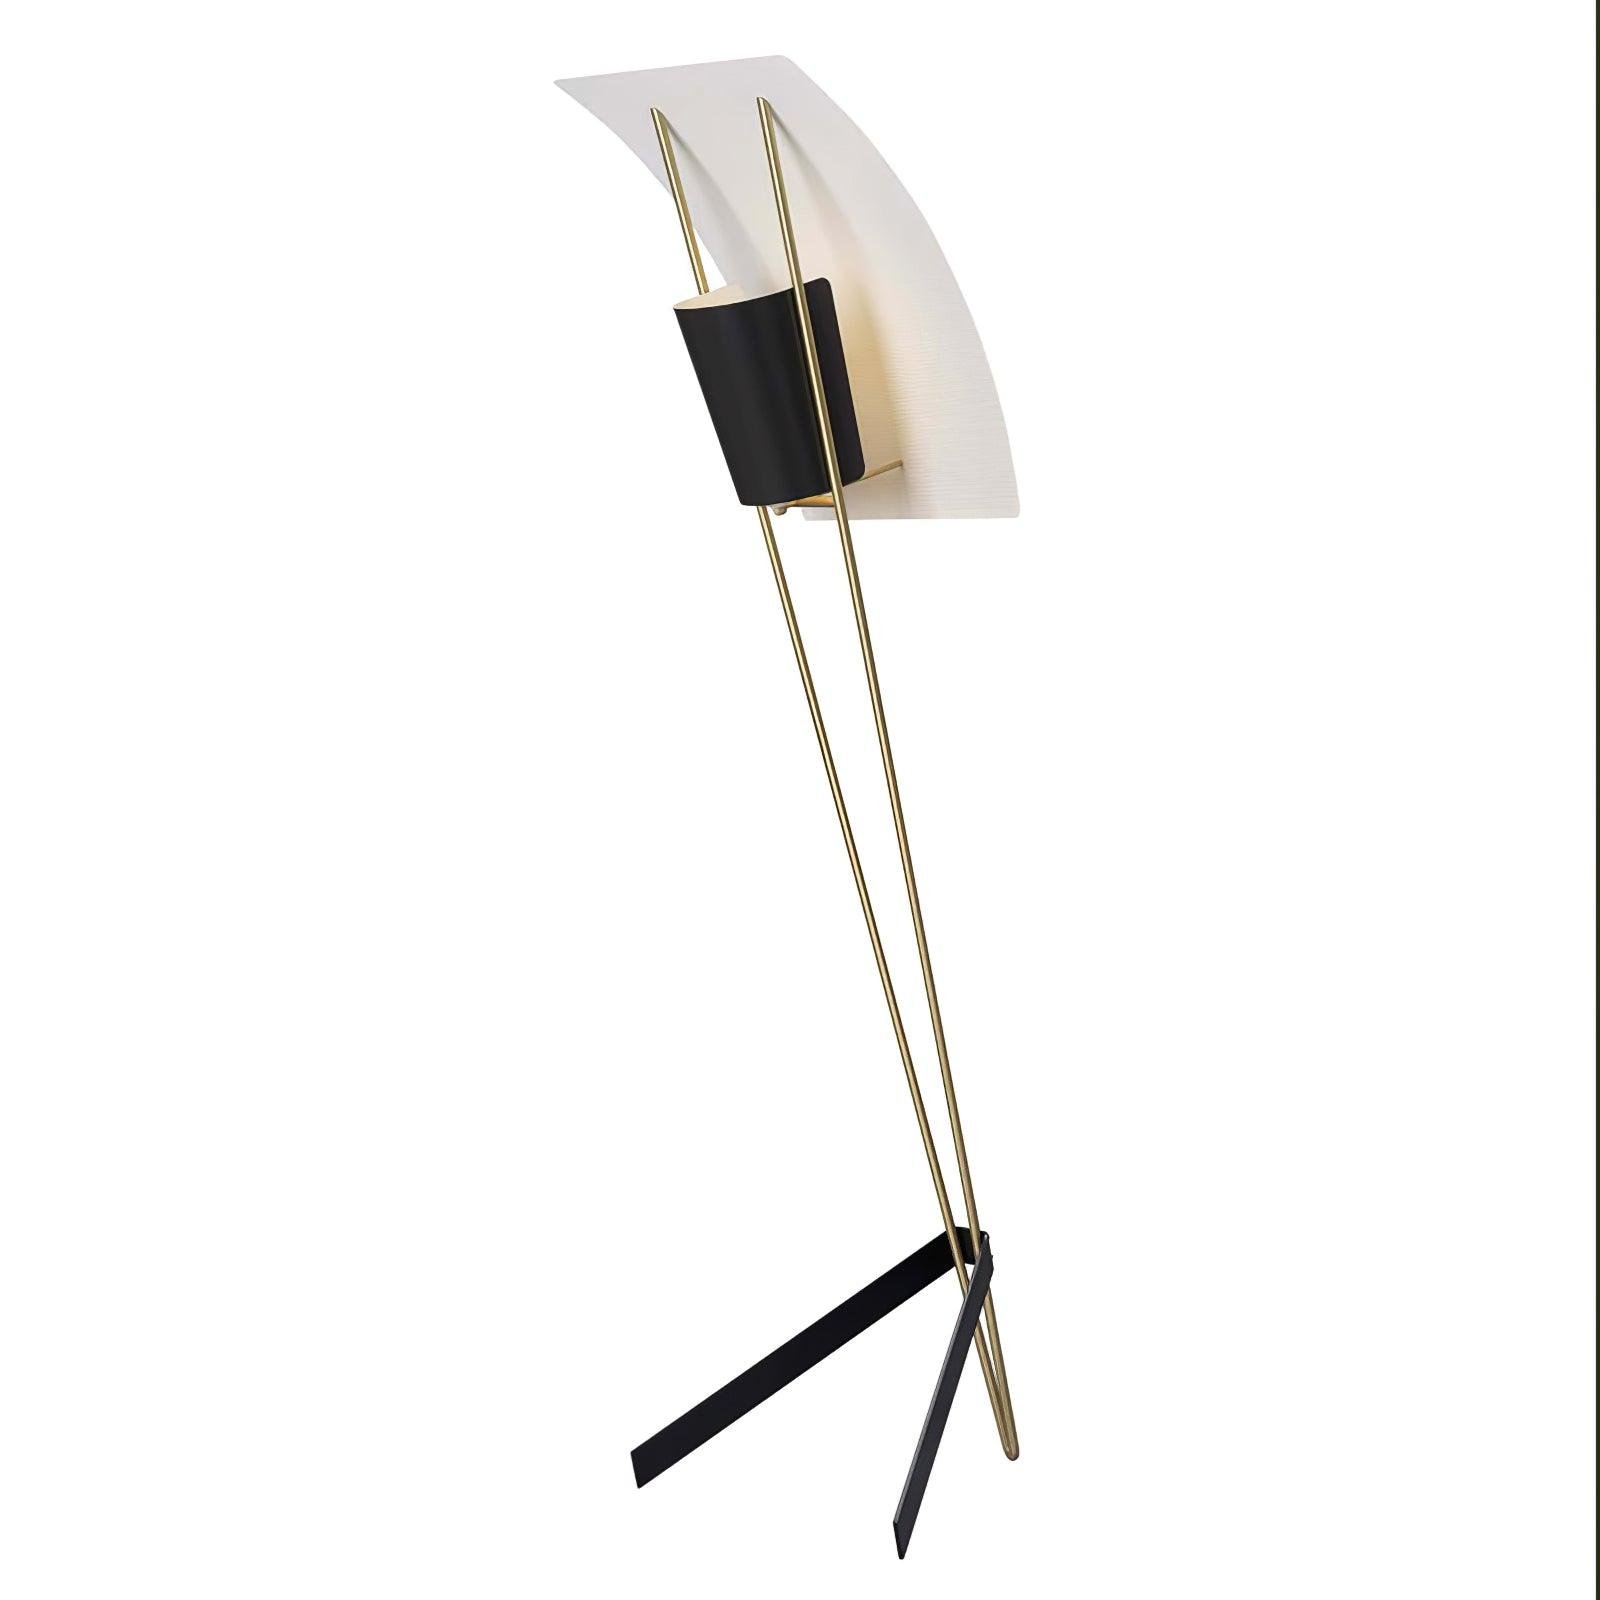 EU Plug Kite Floor Lamp with Dimensions W 19.7" x H 65" (W 58cm x H 165cm), in Black and Gold